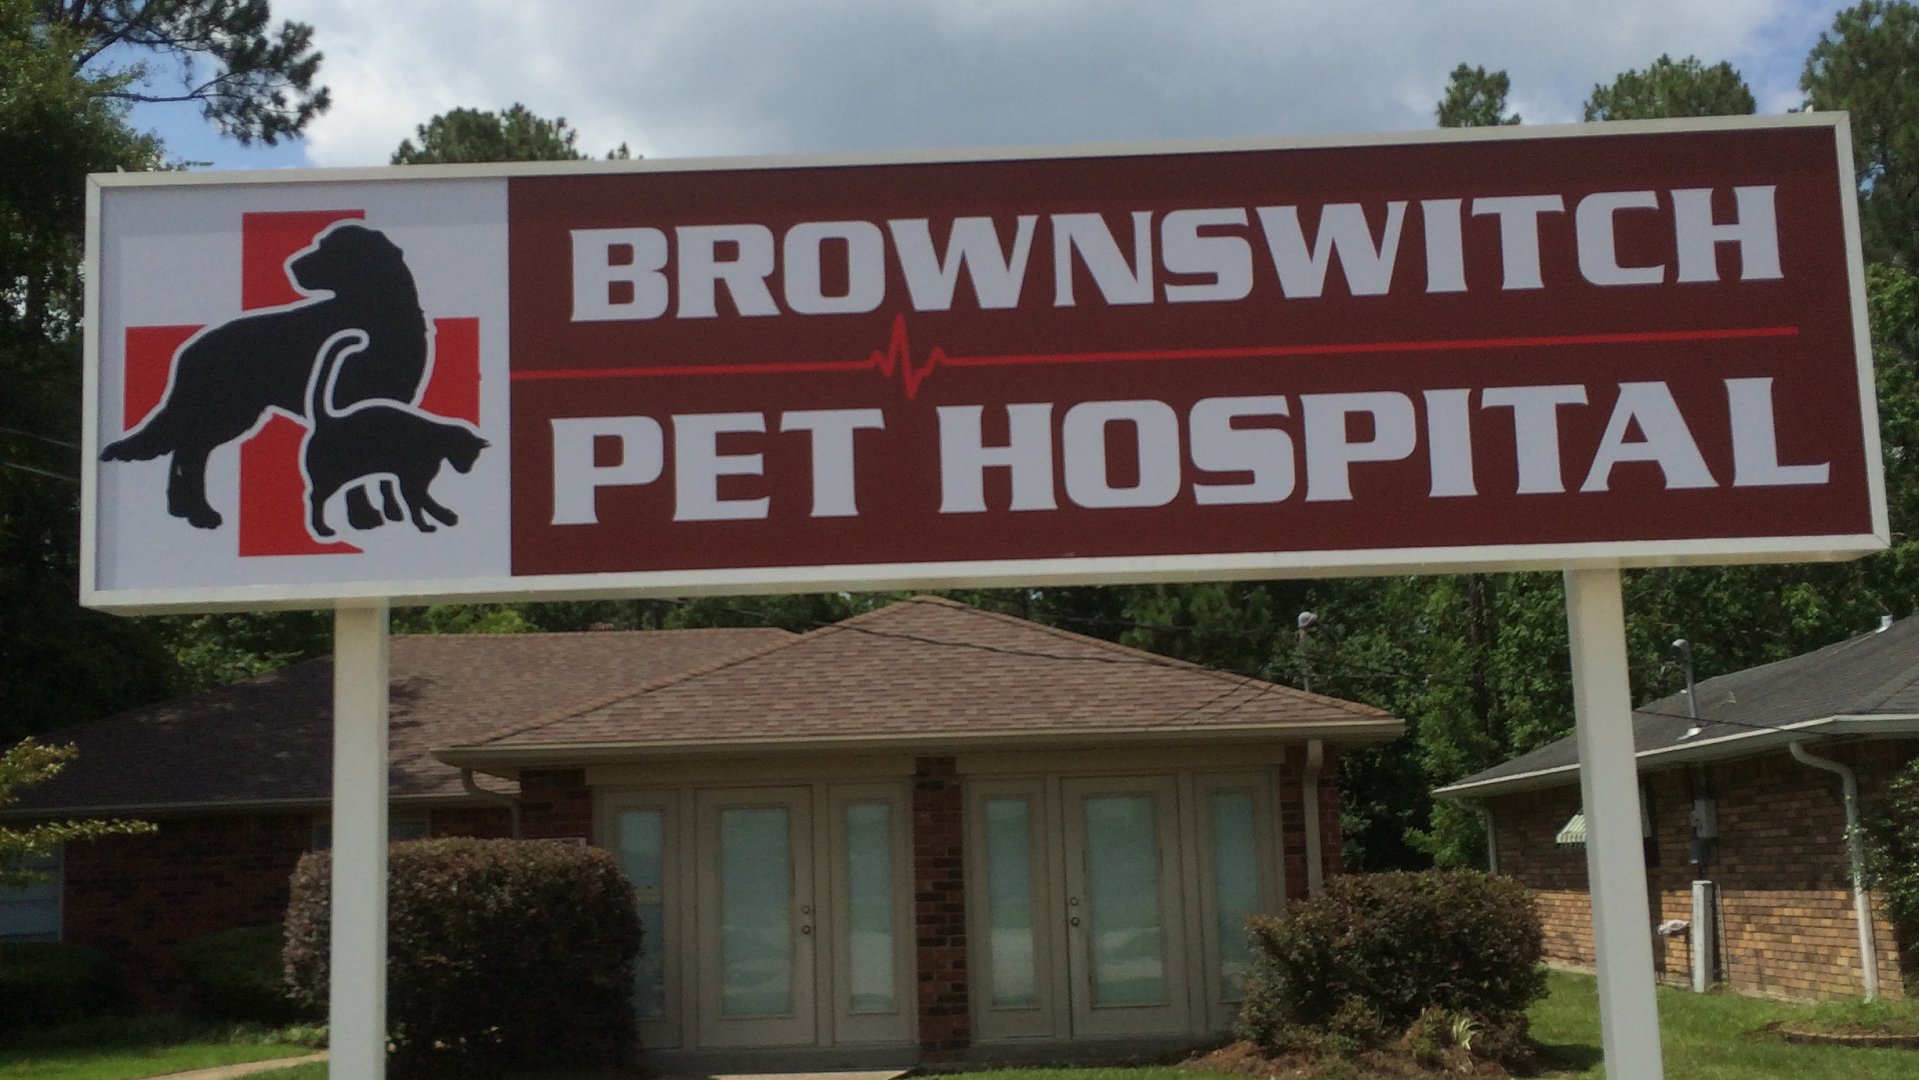 Brownswitch Pet Hospital